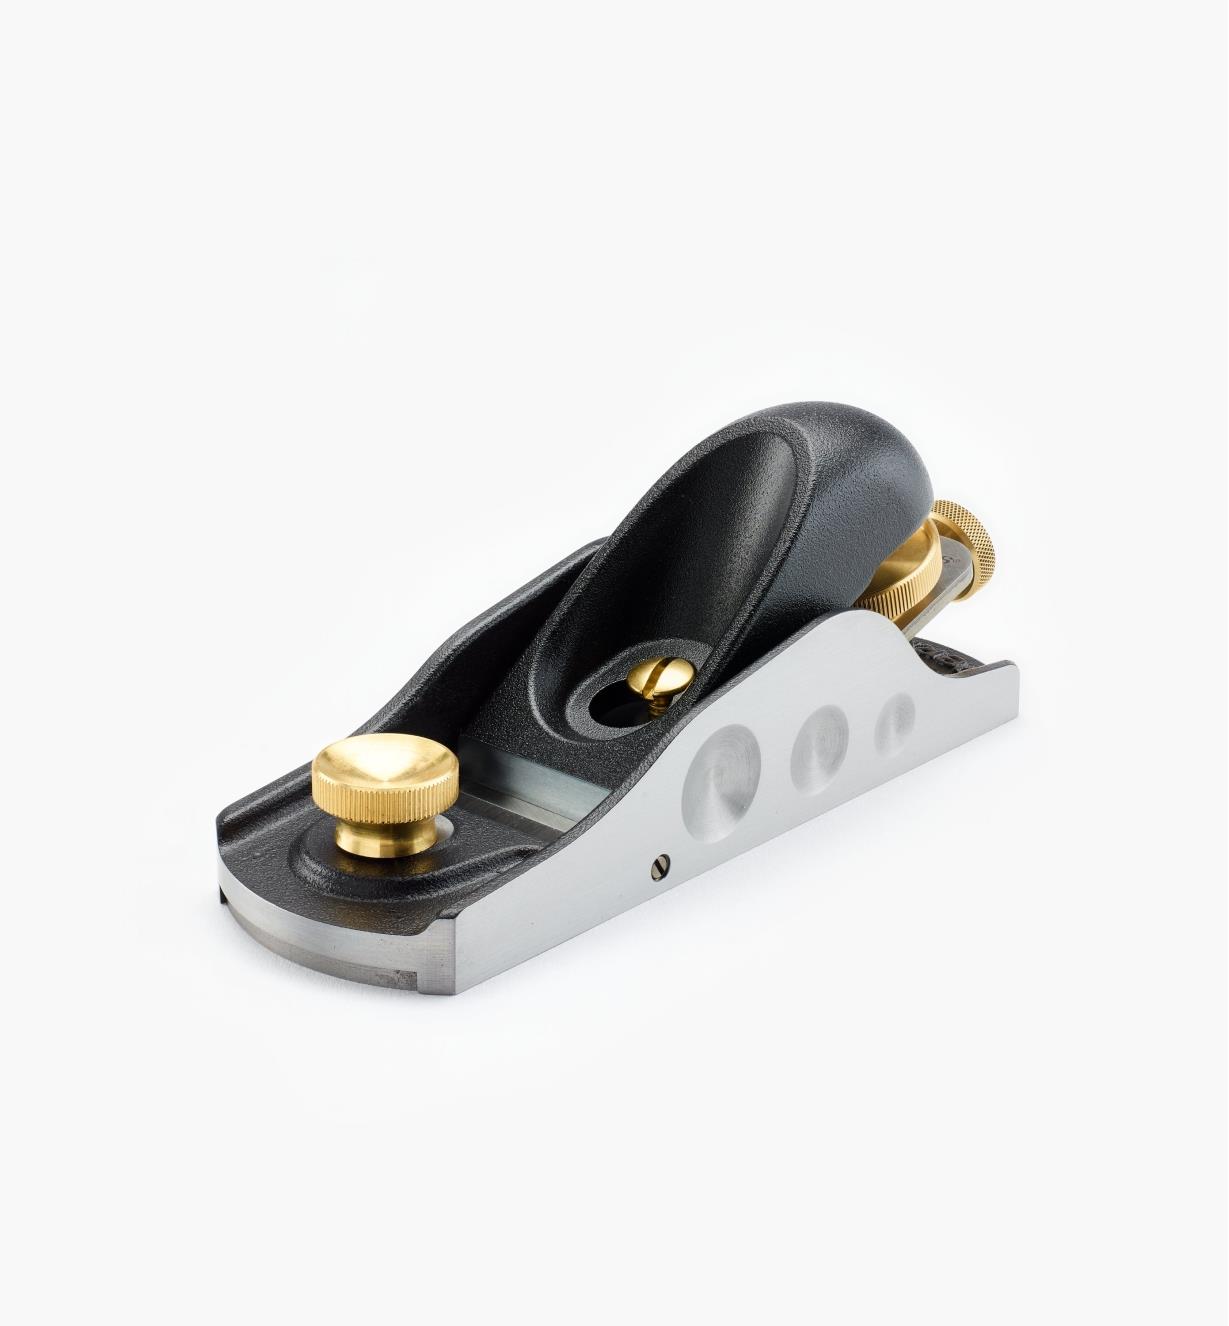 CM210P - Low-Angle Block Plane, PM-V11 – Manufacturing Second